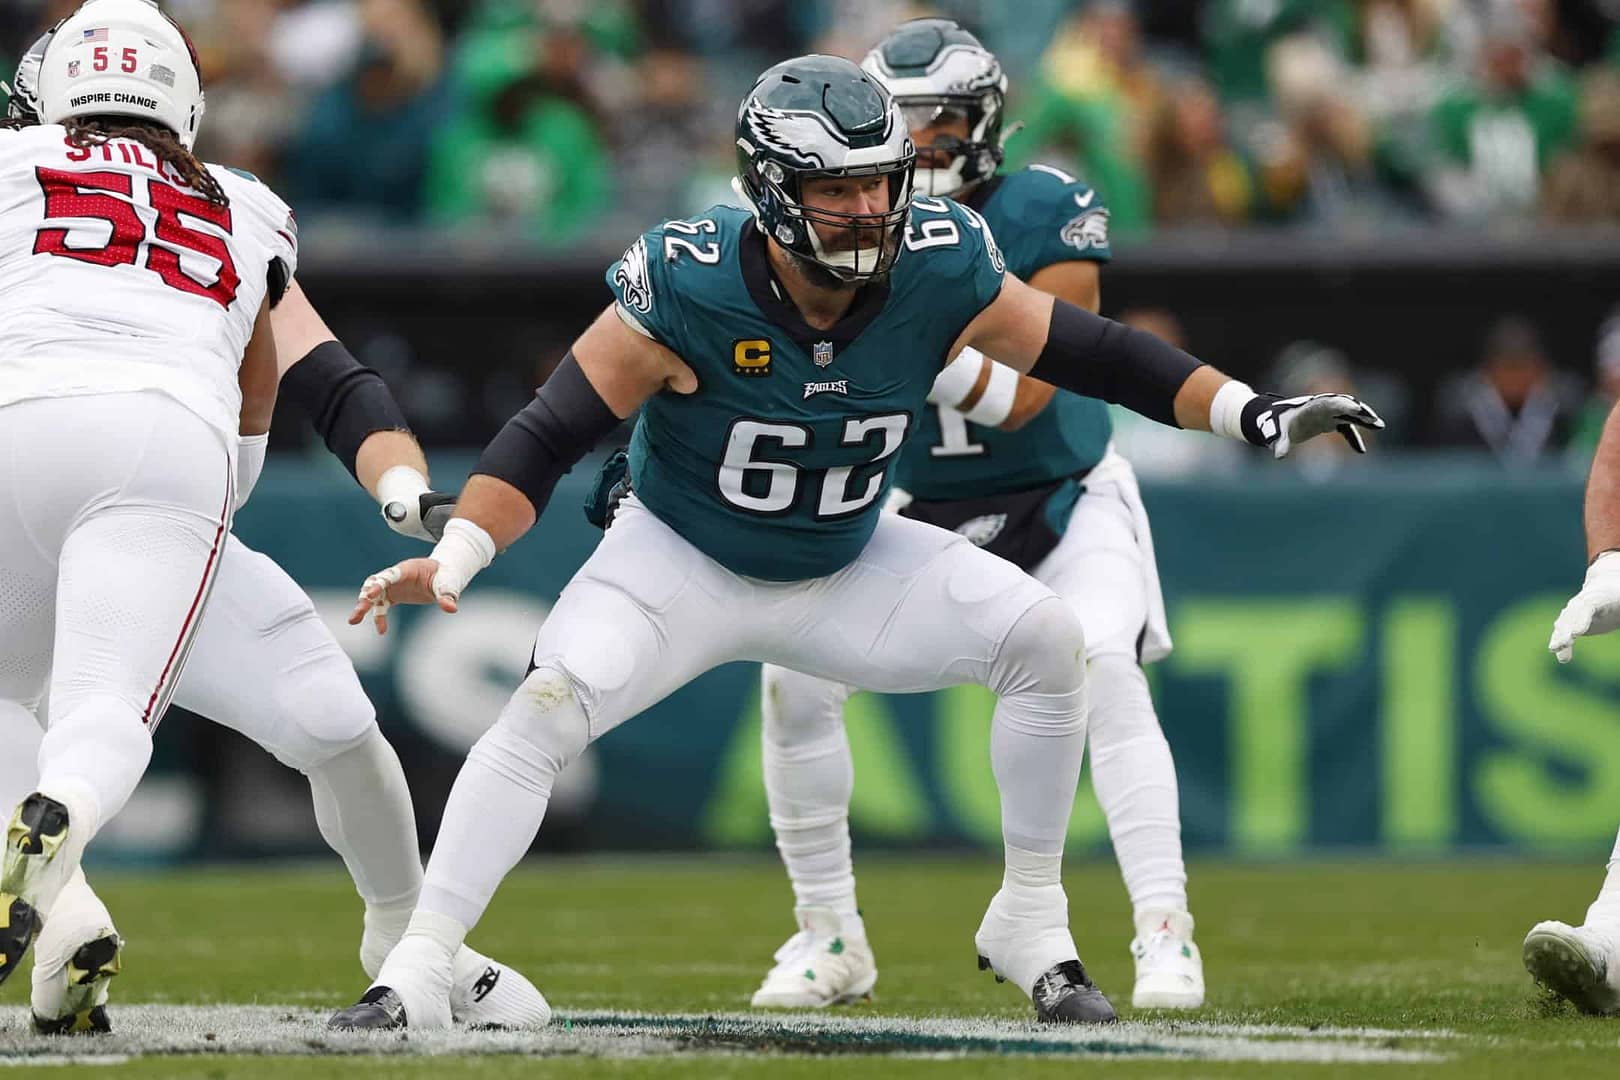 Is Jason Kelce a Hall of Famer? The star Philadelphia Eagles center just retired after the team's blowout playoff loss...